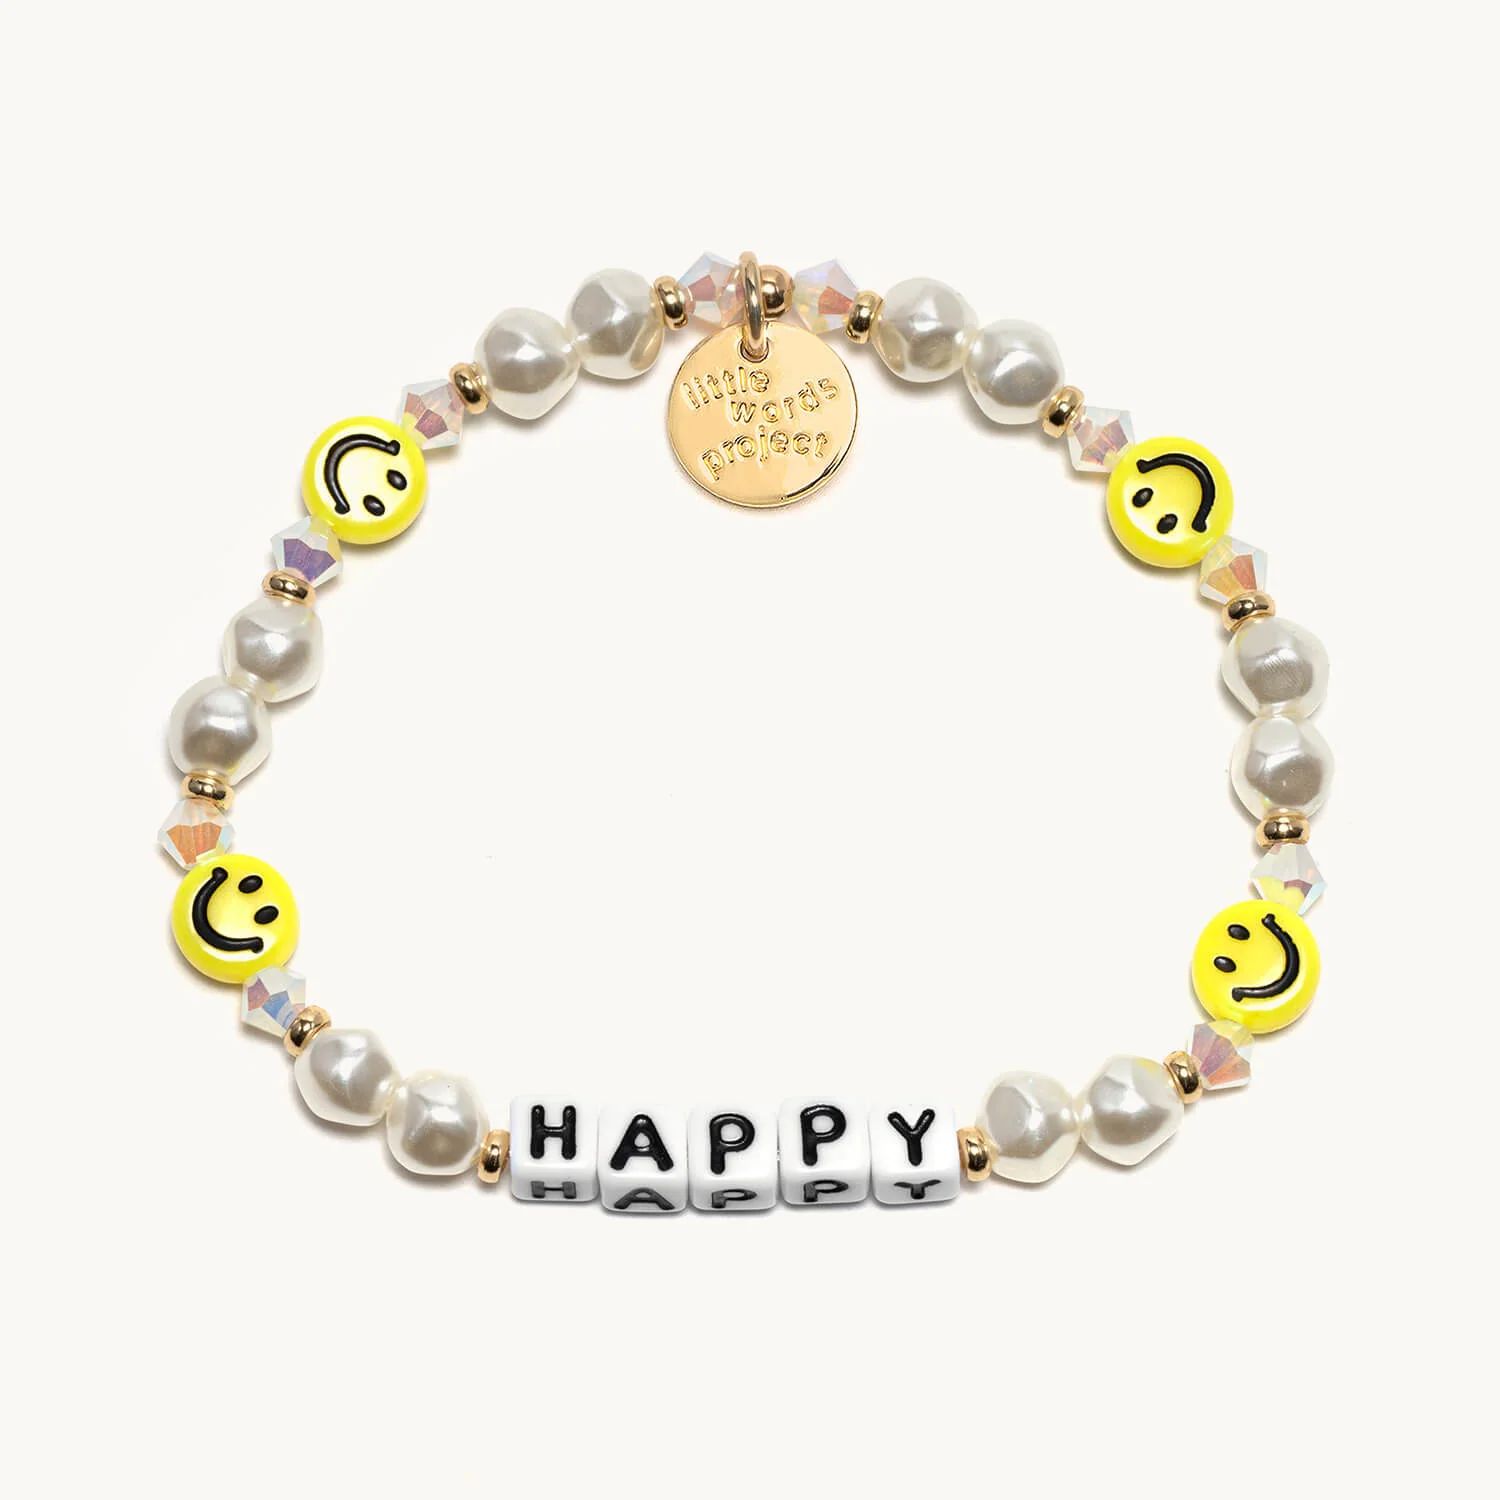 Happy- Festival | Little Words Project